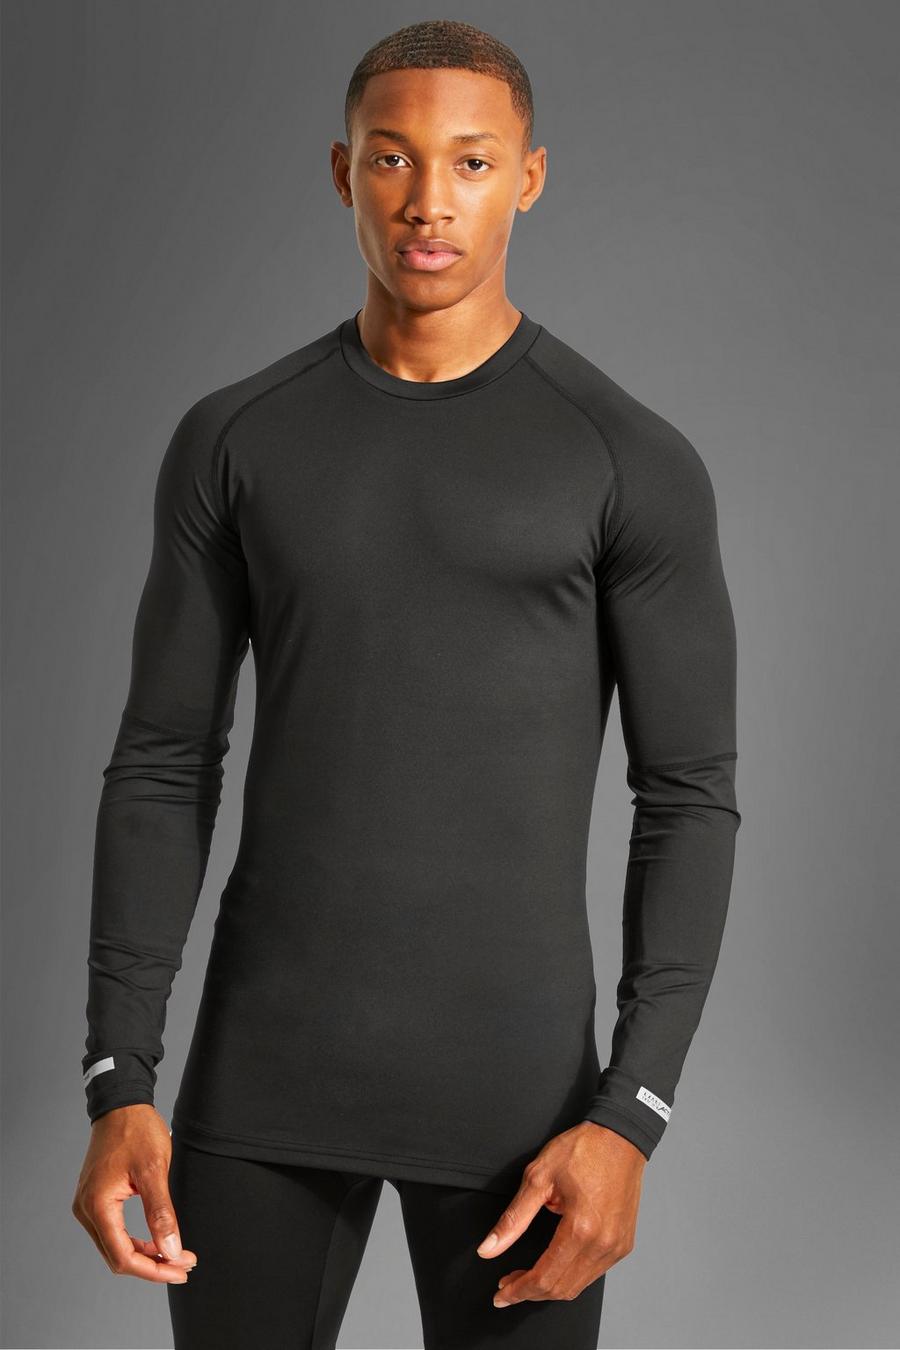 T-shirt Active Gym per alta performance a compressione, Black nero image number 1